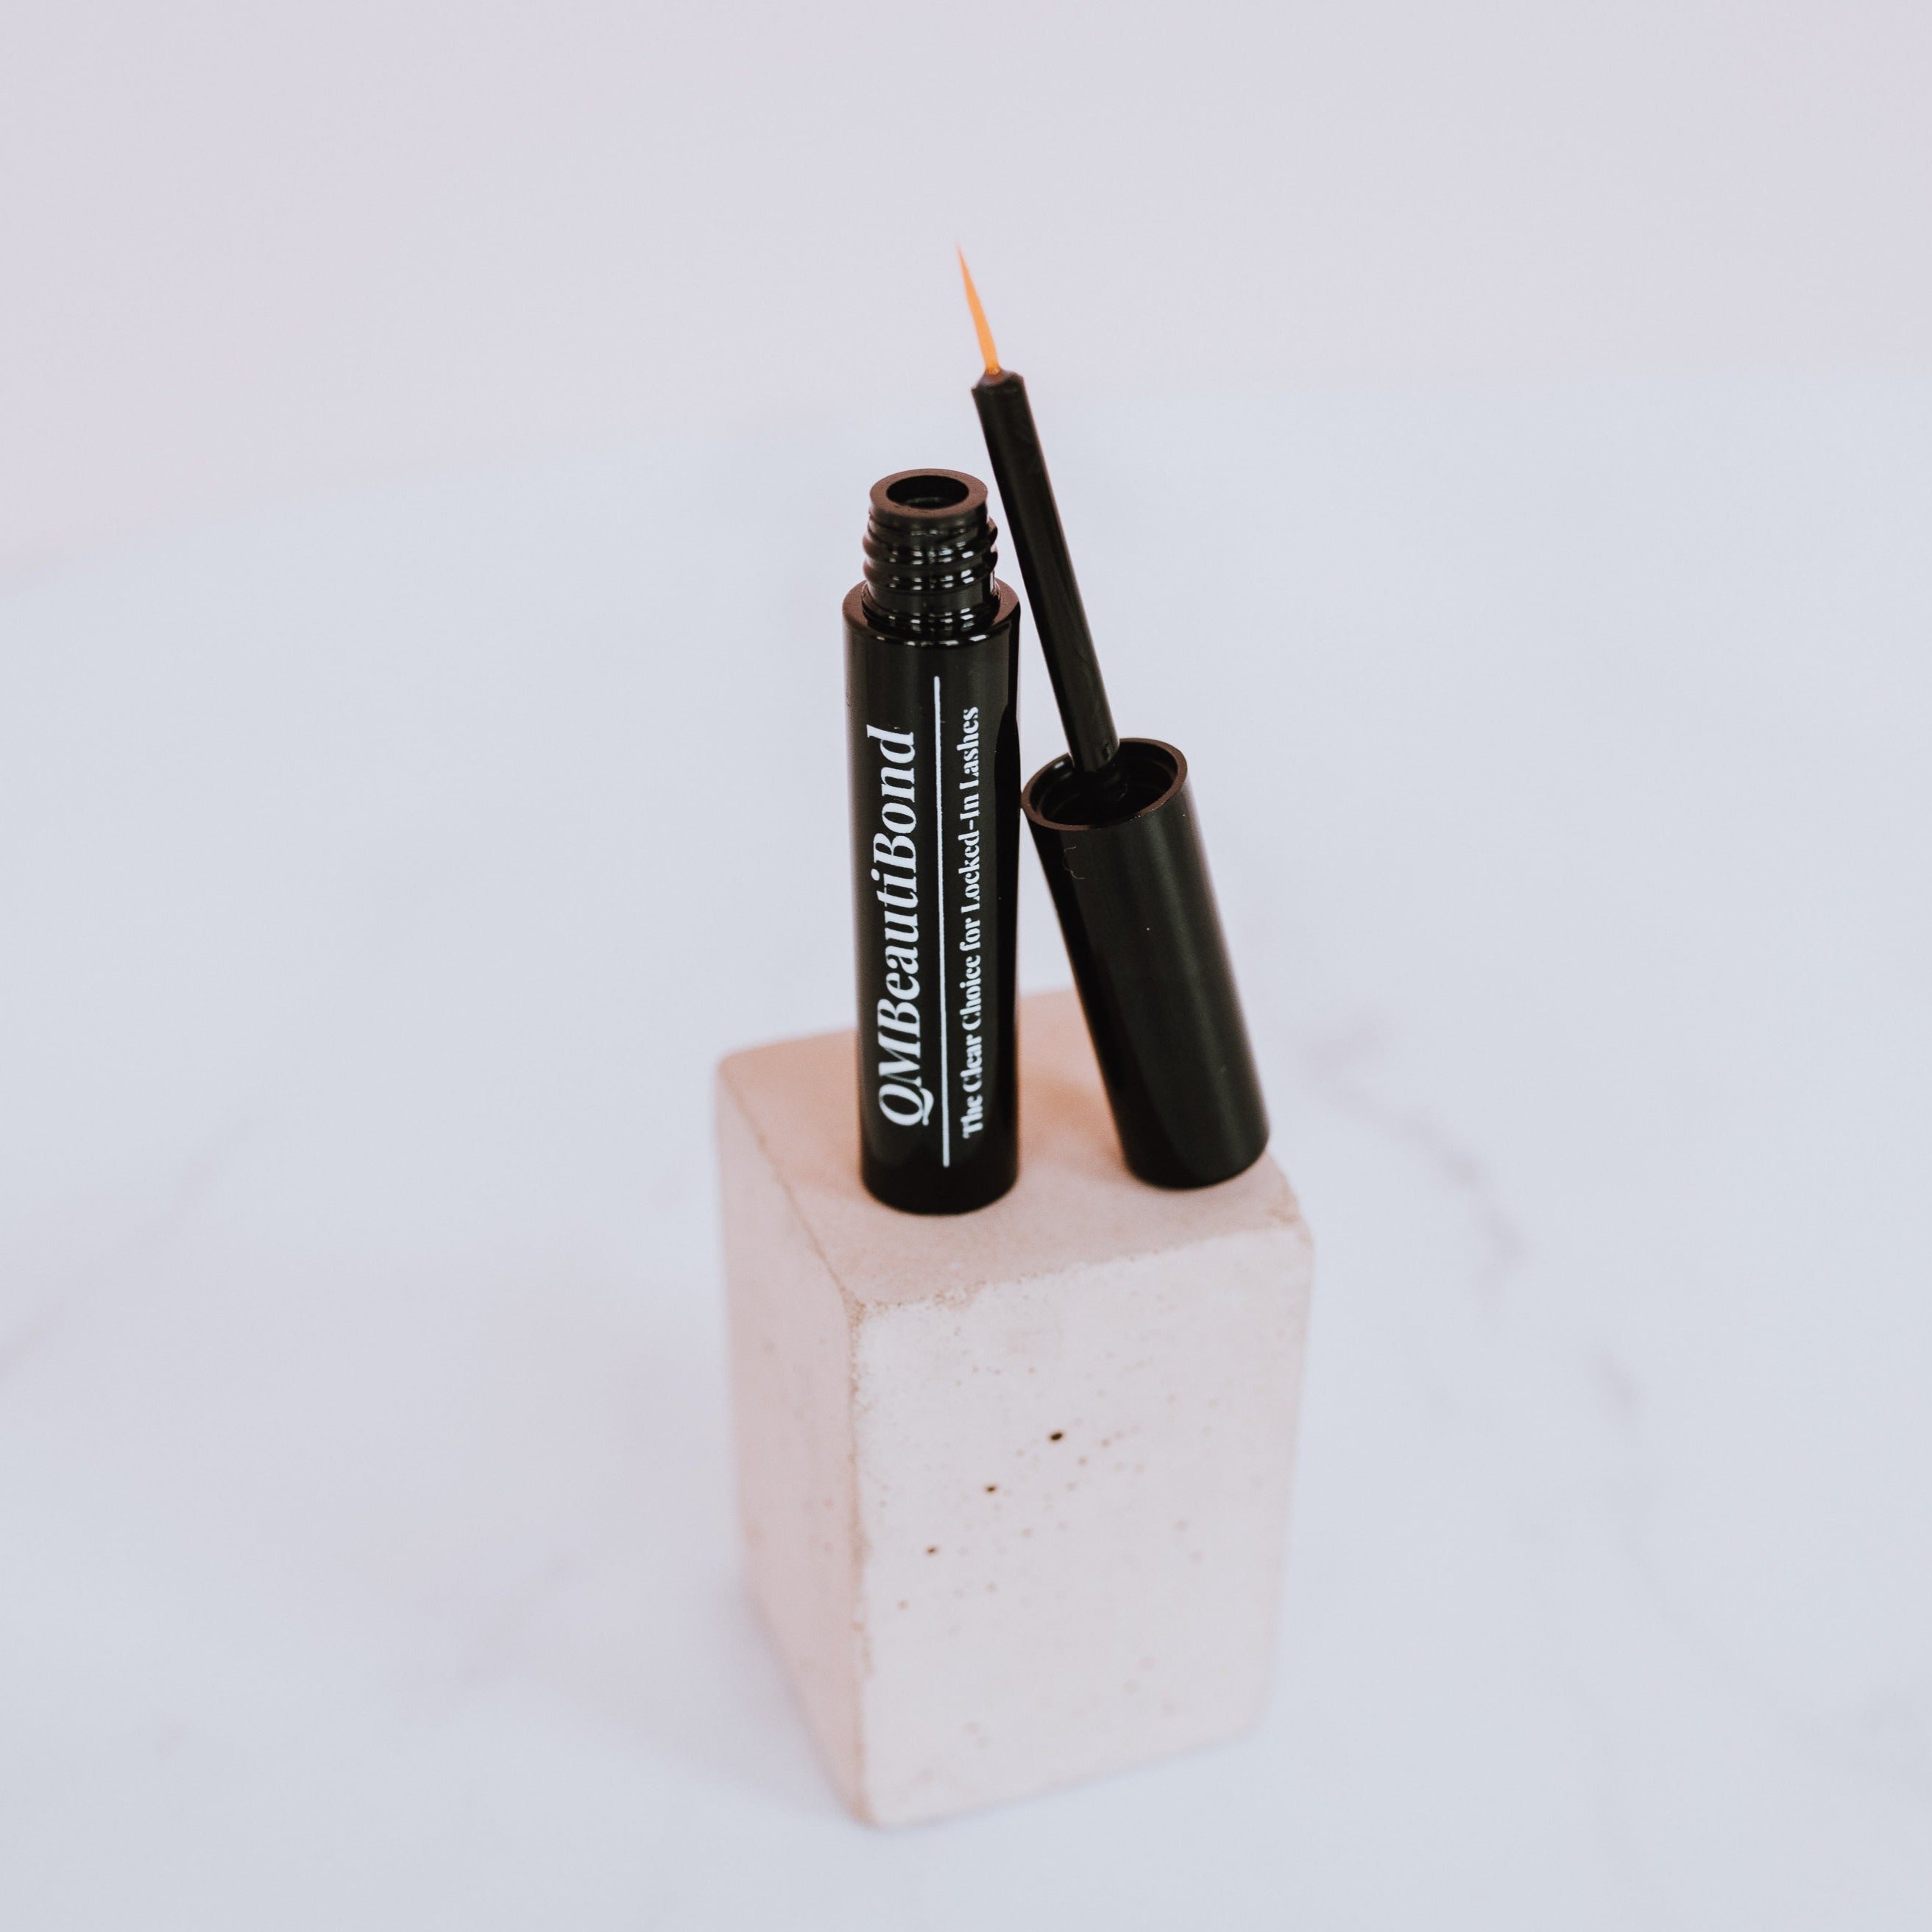 Clear Liquid Eyeliner Eyelash Adhesive. Clear Liquid Eyeliner (False Eyelash Adhesive). Applies like a liquid eyeliner along the lash line to connect false lashes. Leaping Bunny Certified. Paraben, Phthalate and Fragrance Free. Vegan.